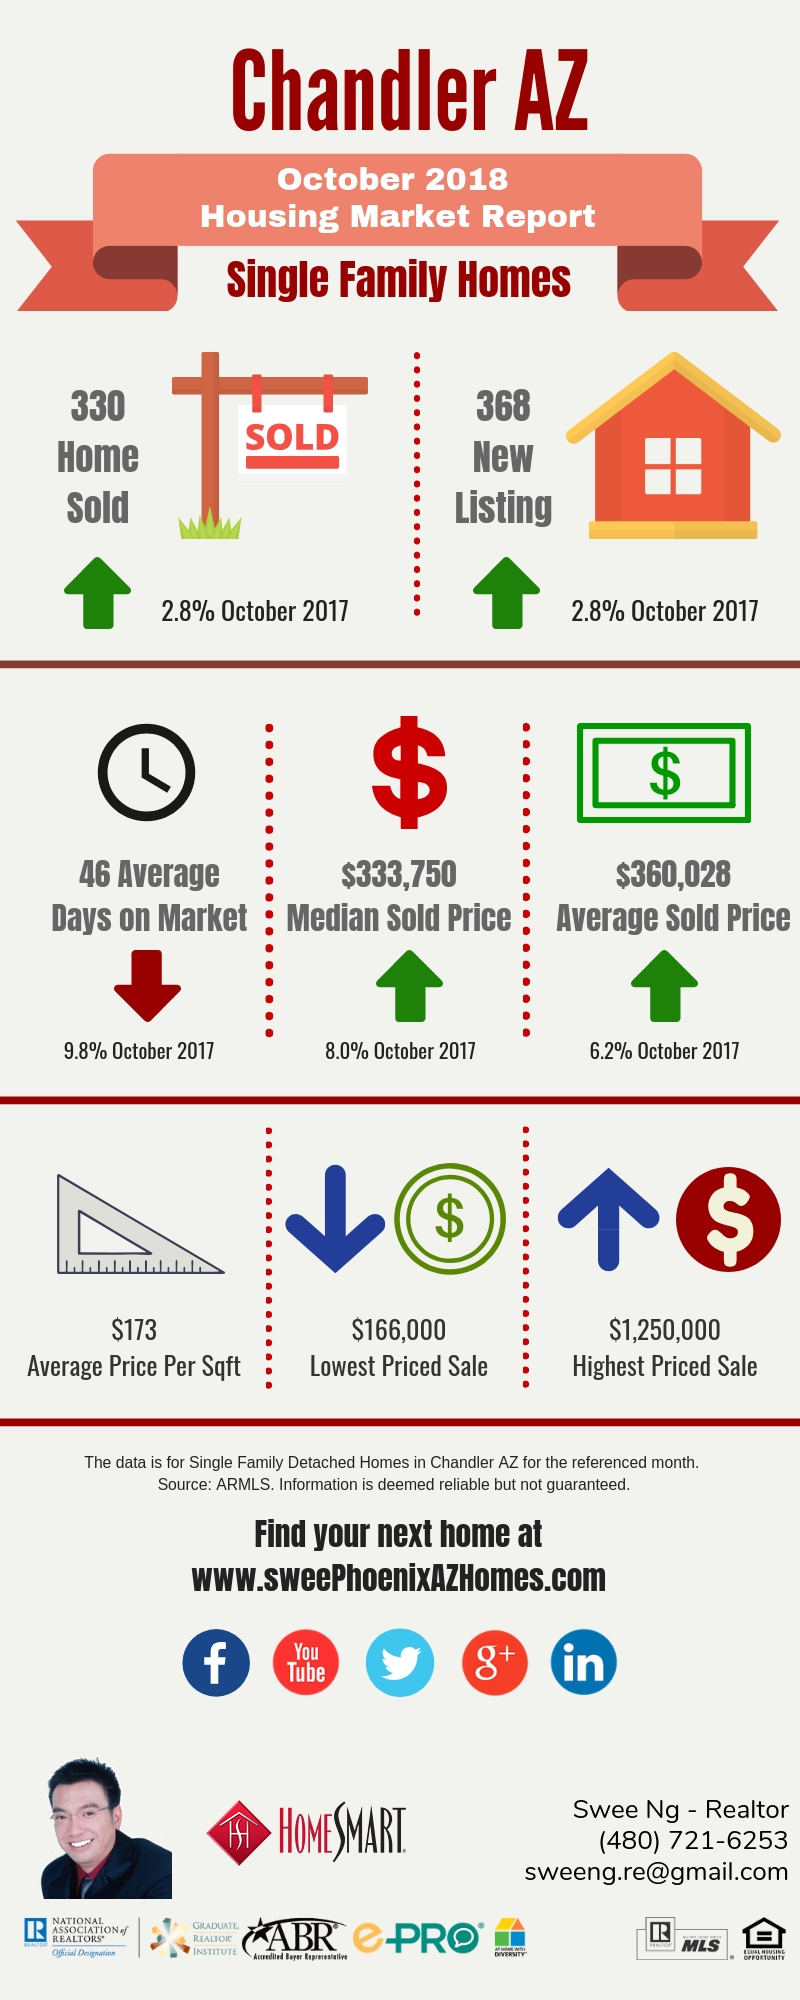 Chandler AZ Housing Market Update October 2018 by Swee Ng, House Value and Real Estate Listings